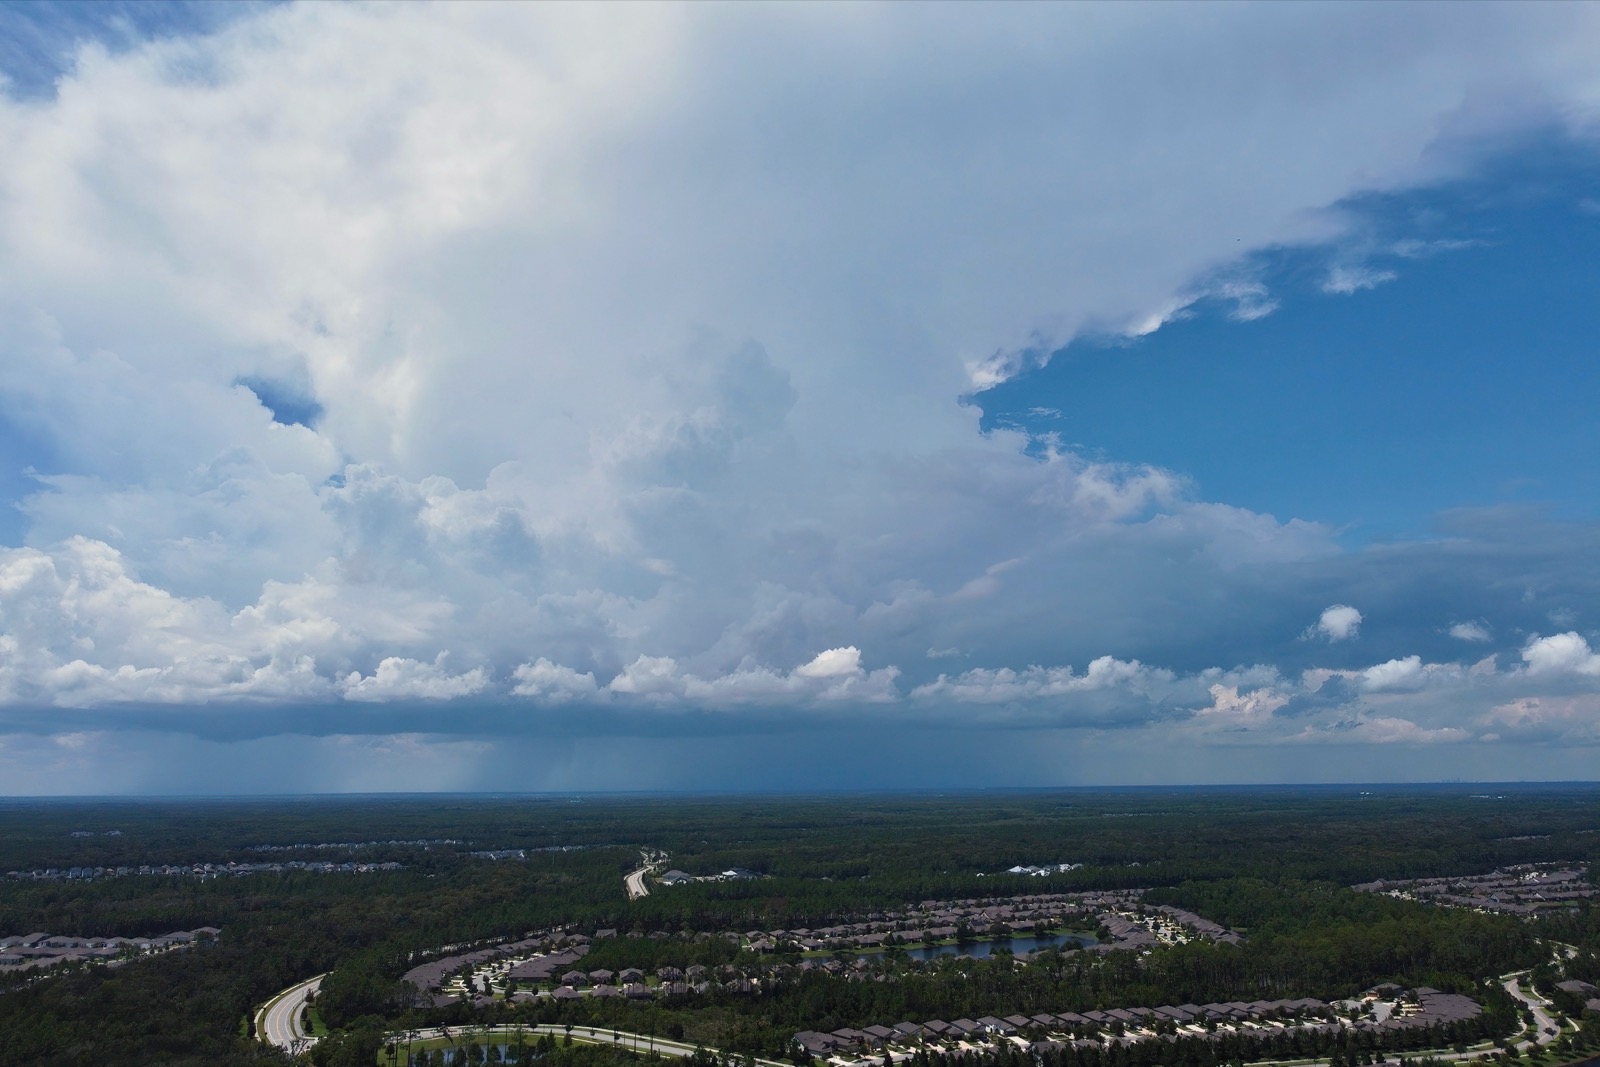 Arial view of an isolated rain storm in the distance over a suburban landscape